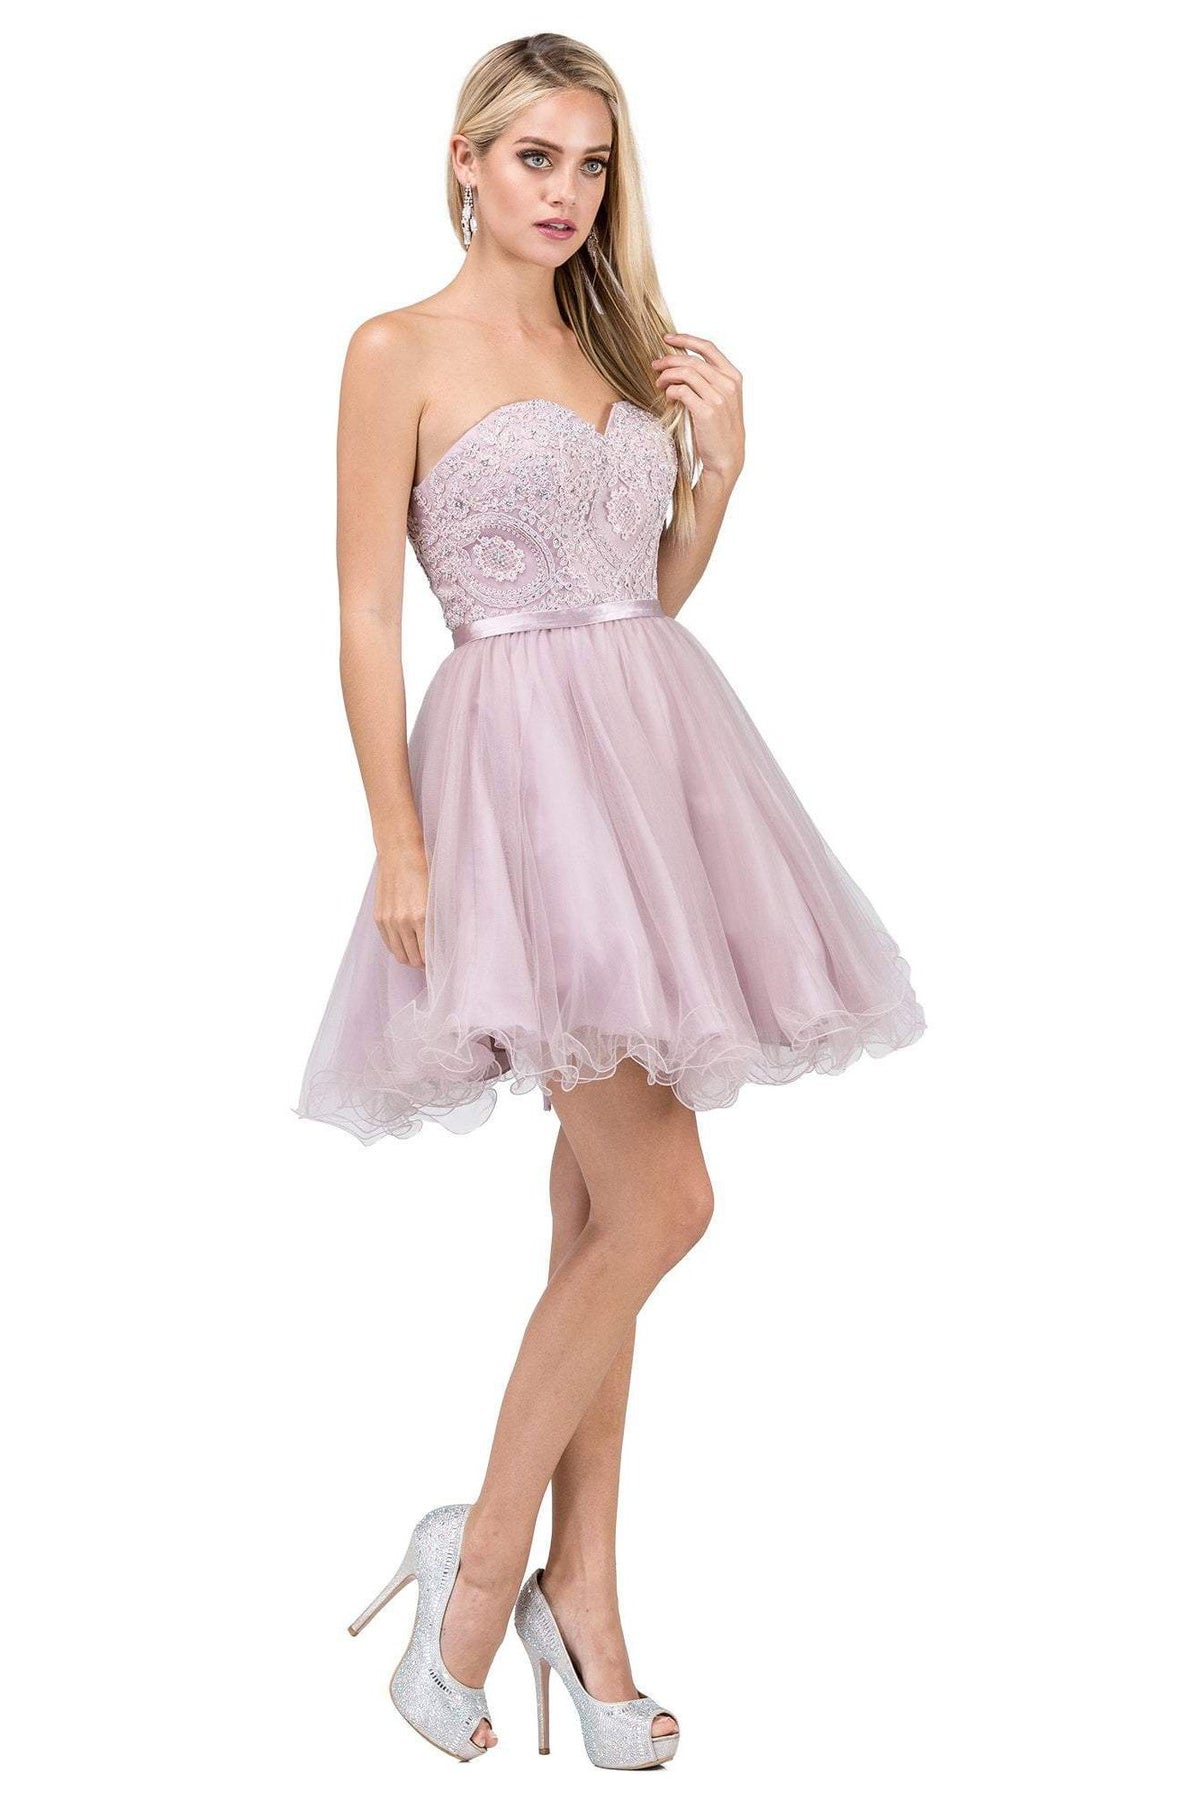 Dancing Queen - 3014 Strapless Embellished Sweetheart Homecoming Dress In Pink